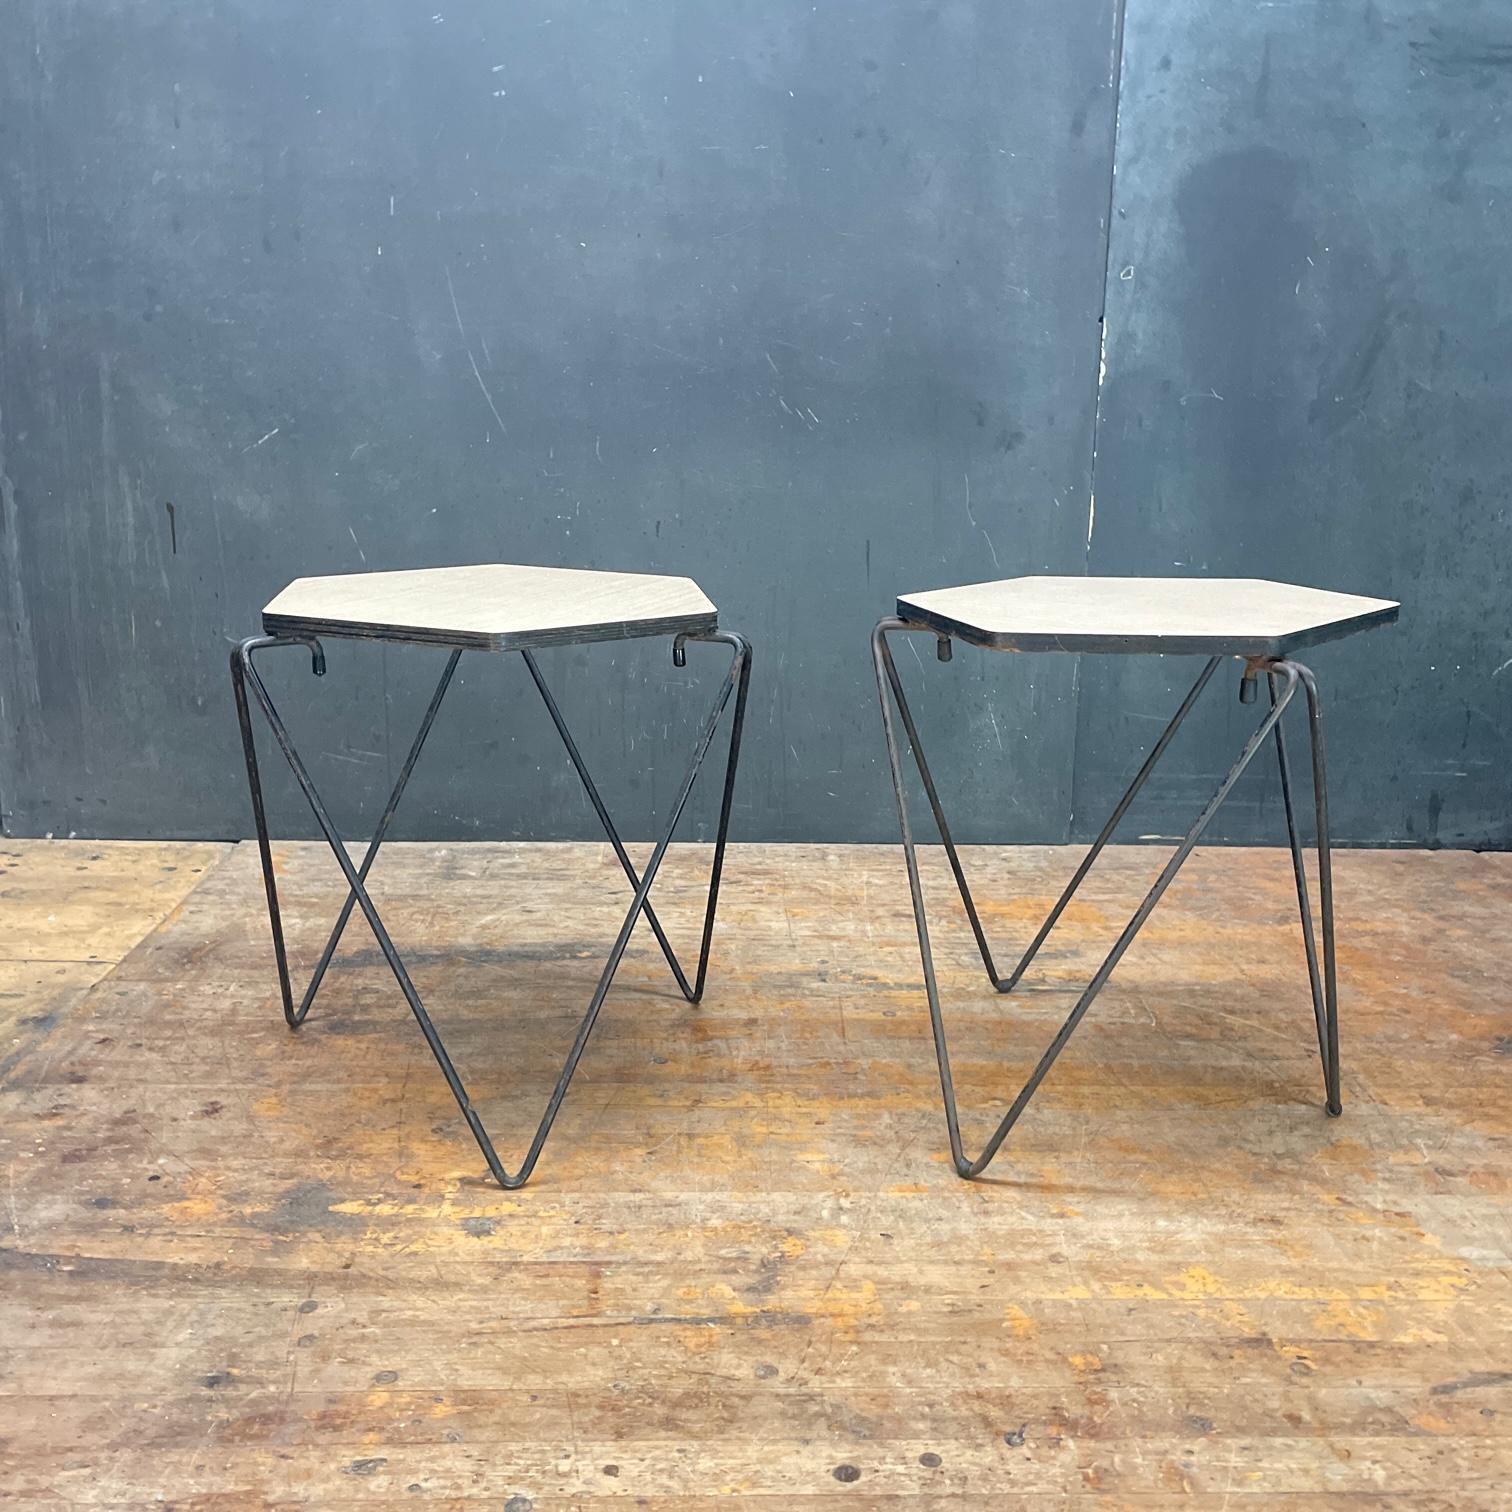 A wonderful pair of bent iron rod and plywood/micarta side tables.  In the style of Gio Ponti, Cohen & Pratt, with similar construction to Vista of California pieces. But, designer remains unknown.  

W 16.5 x H 16 in. / Stacked H 18.5 in.
